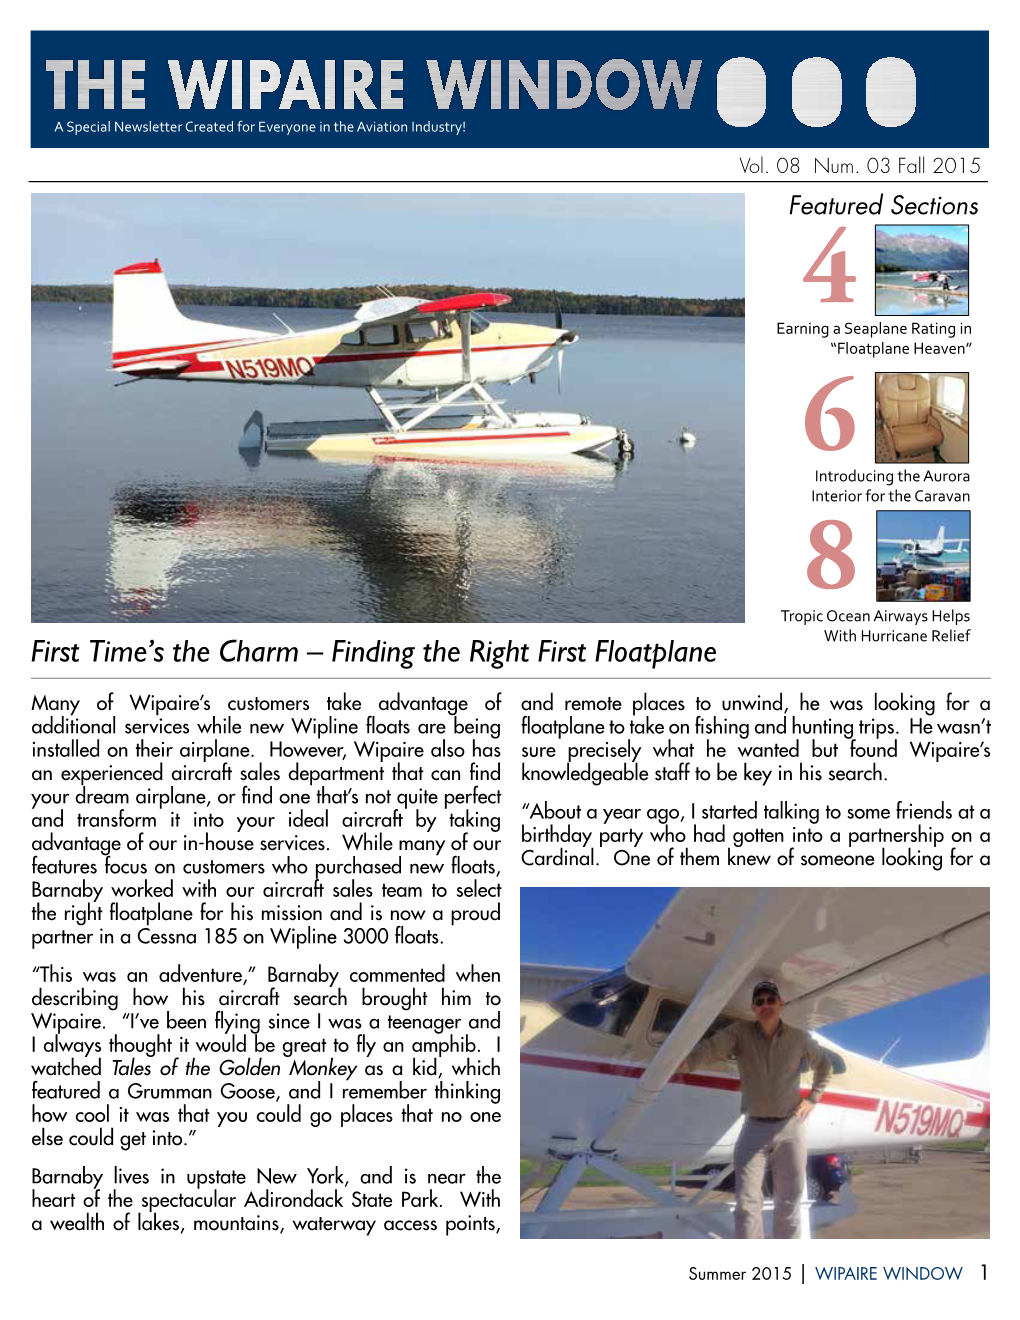 Finding the Right First Floatplane